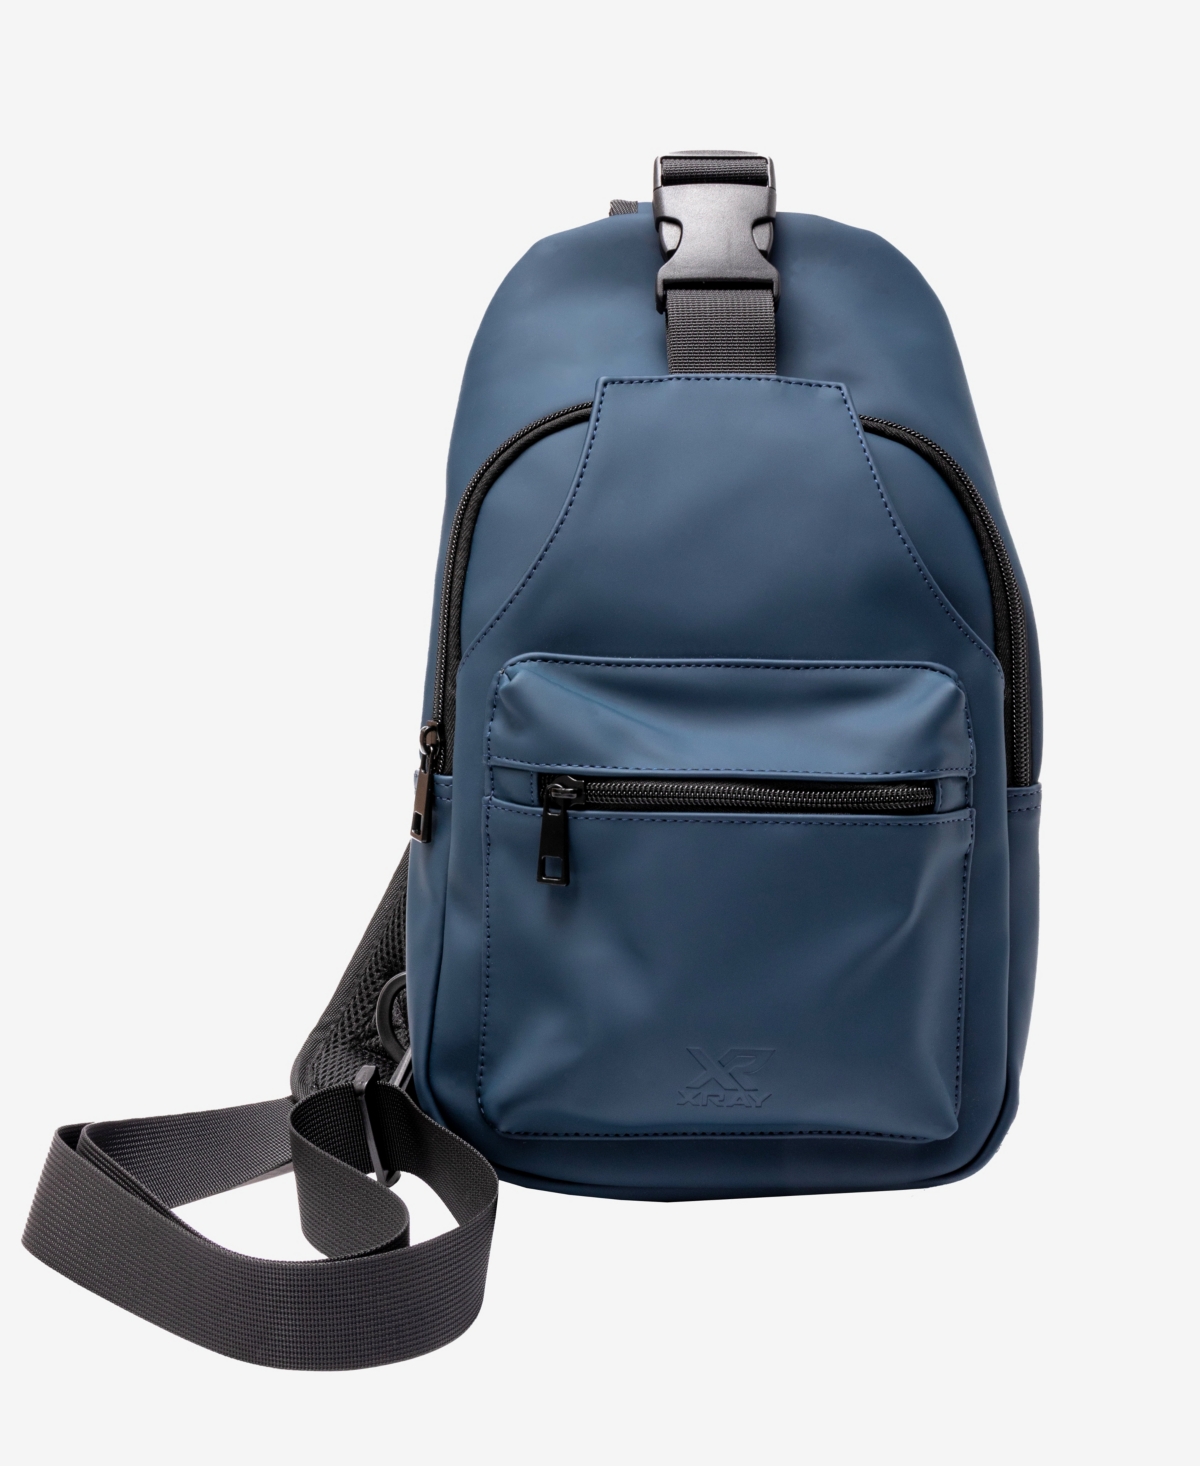 X-ray Pu Sling Backpack In Navy